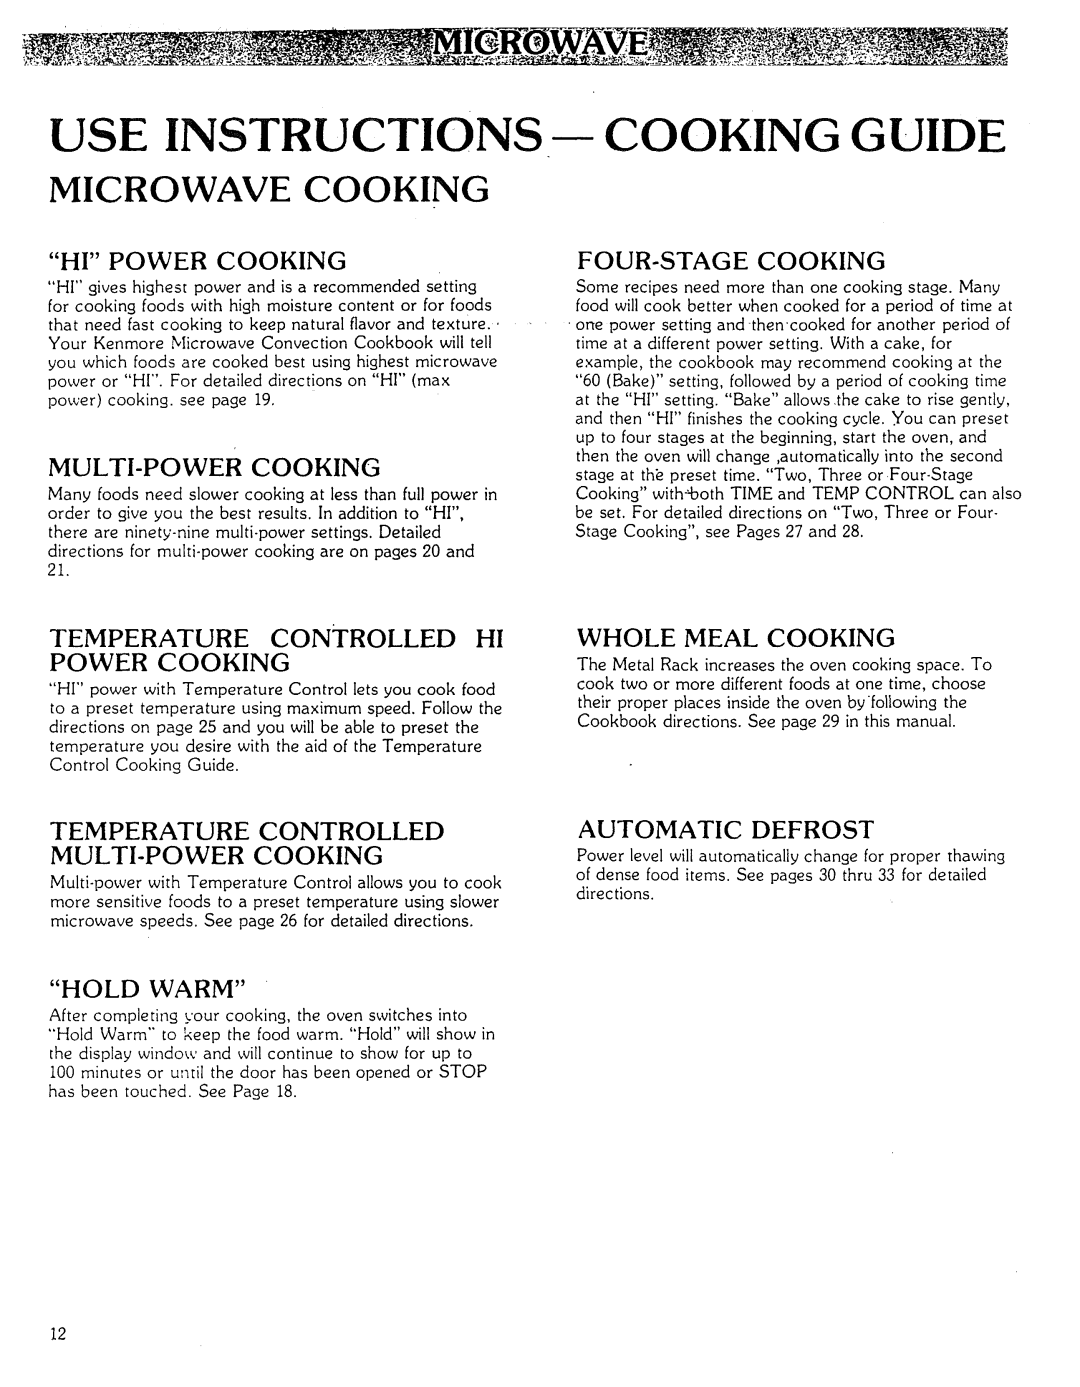 Kenmore Microwave Oven Use Instructions, Multi-Power Cooking, Temperature Controlled Hi Power Cooking, Whole Meal Cooking 